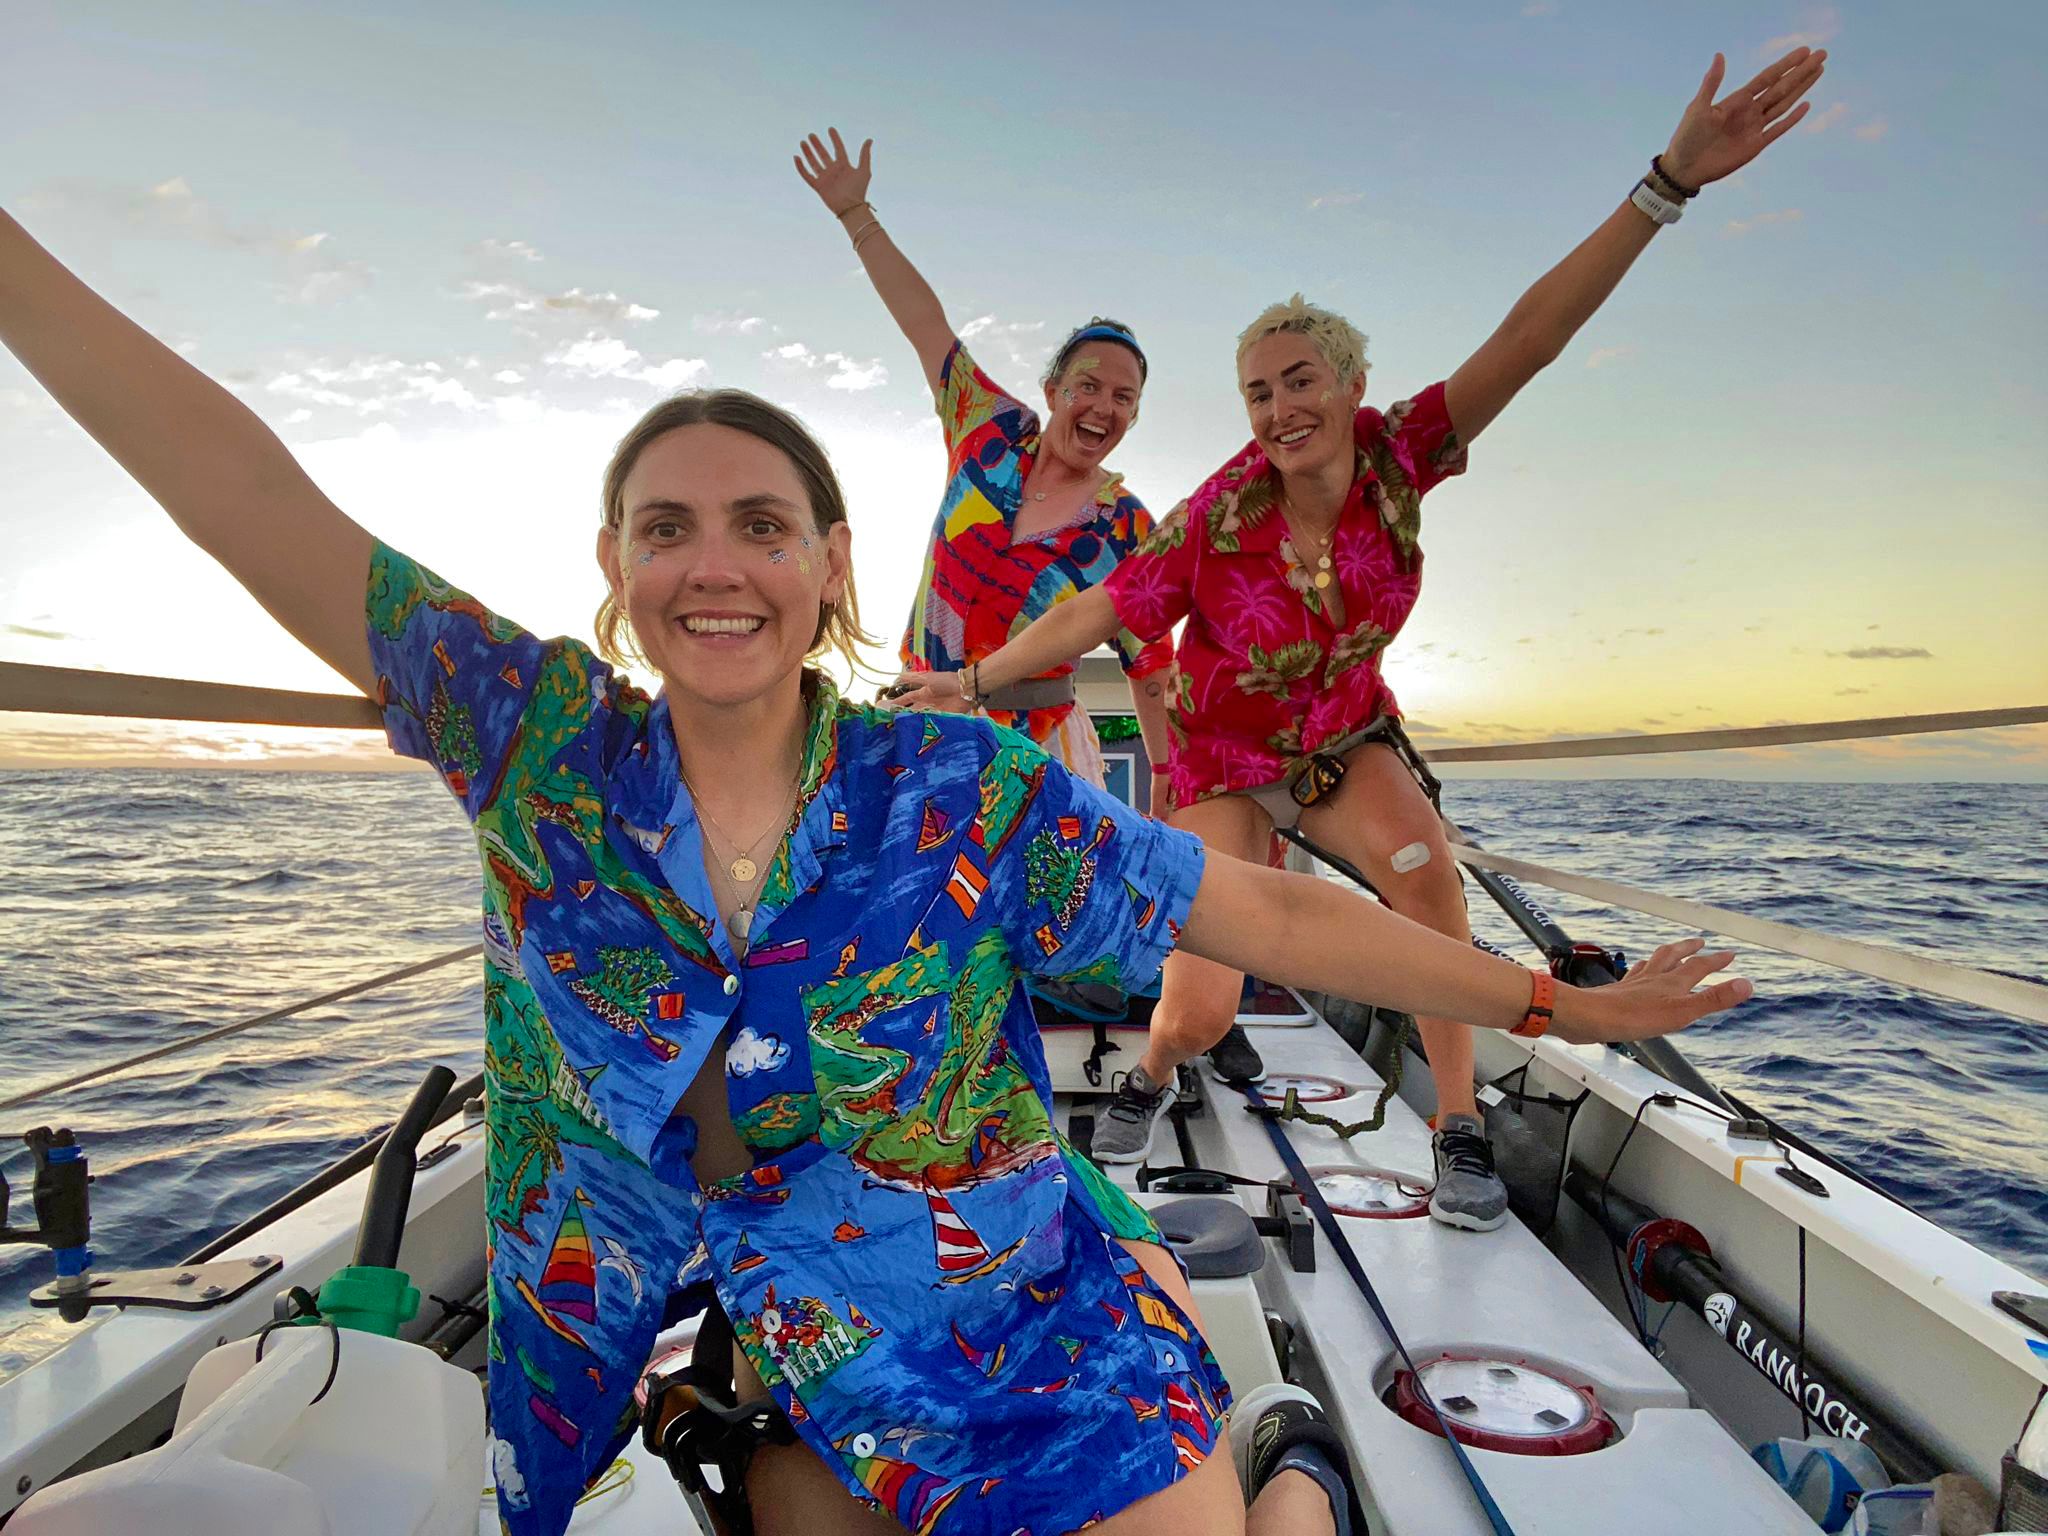 British rowers (front to back) Charlotte Irving, Kat Cordiner and Abby Johnston at sea wearing Hawaiian shirts during their 42-day voyage across the Atlantic.